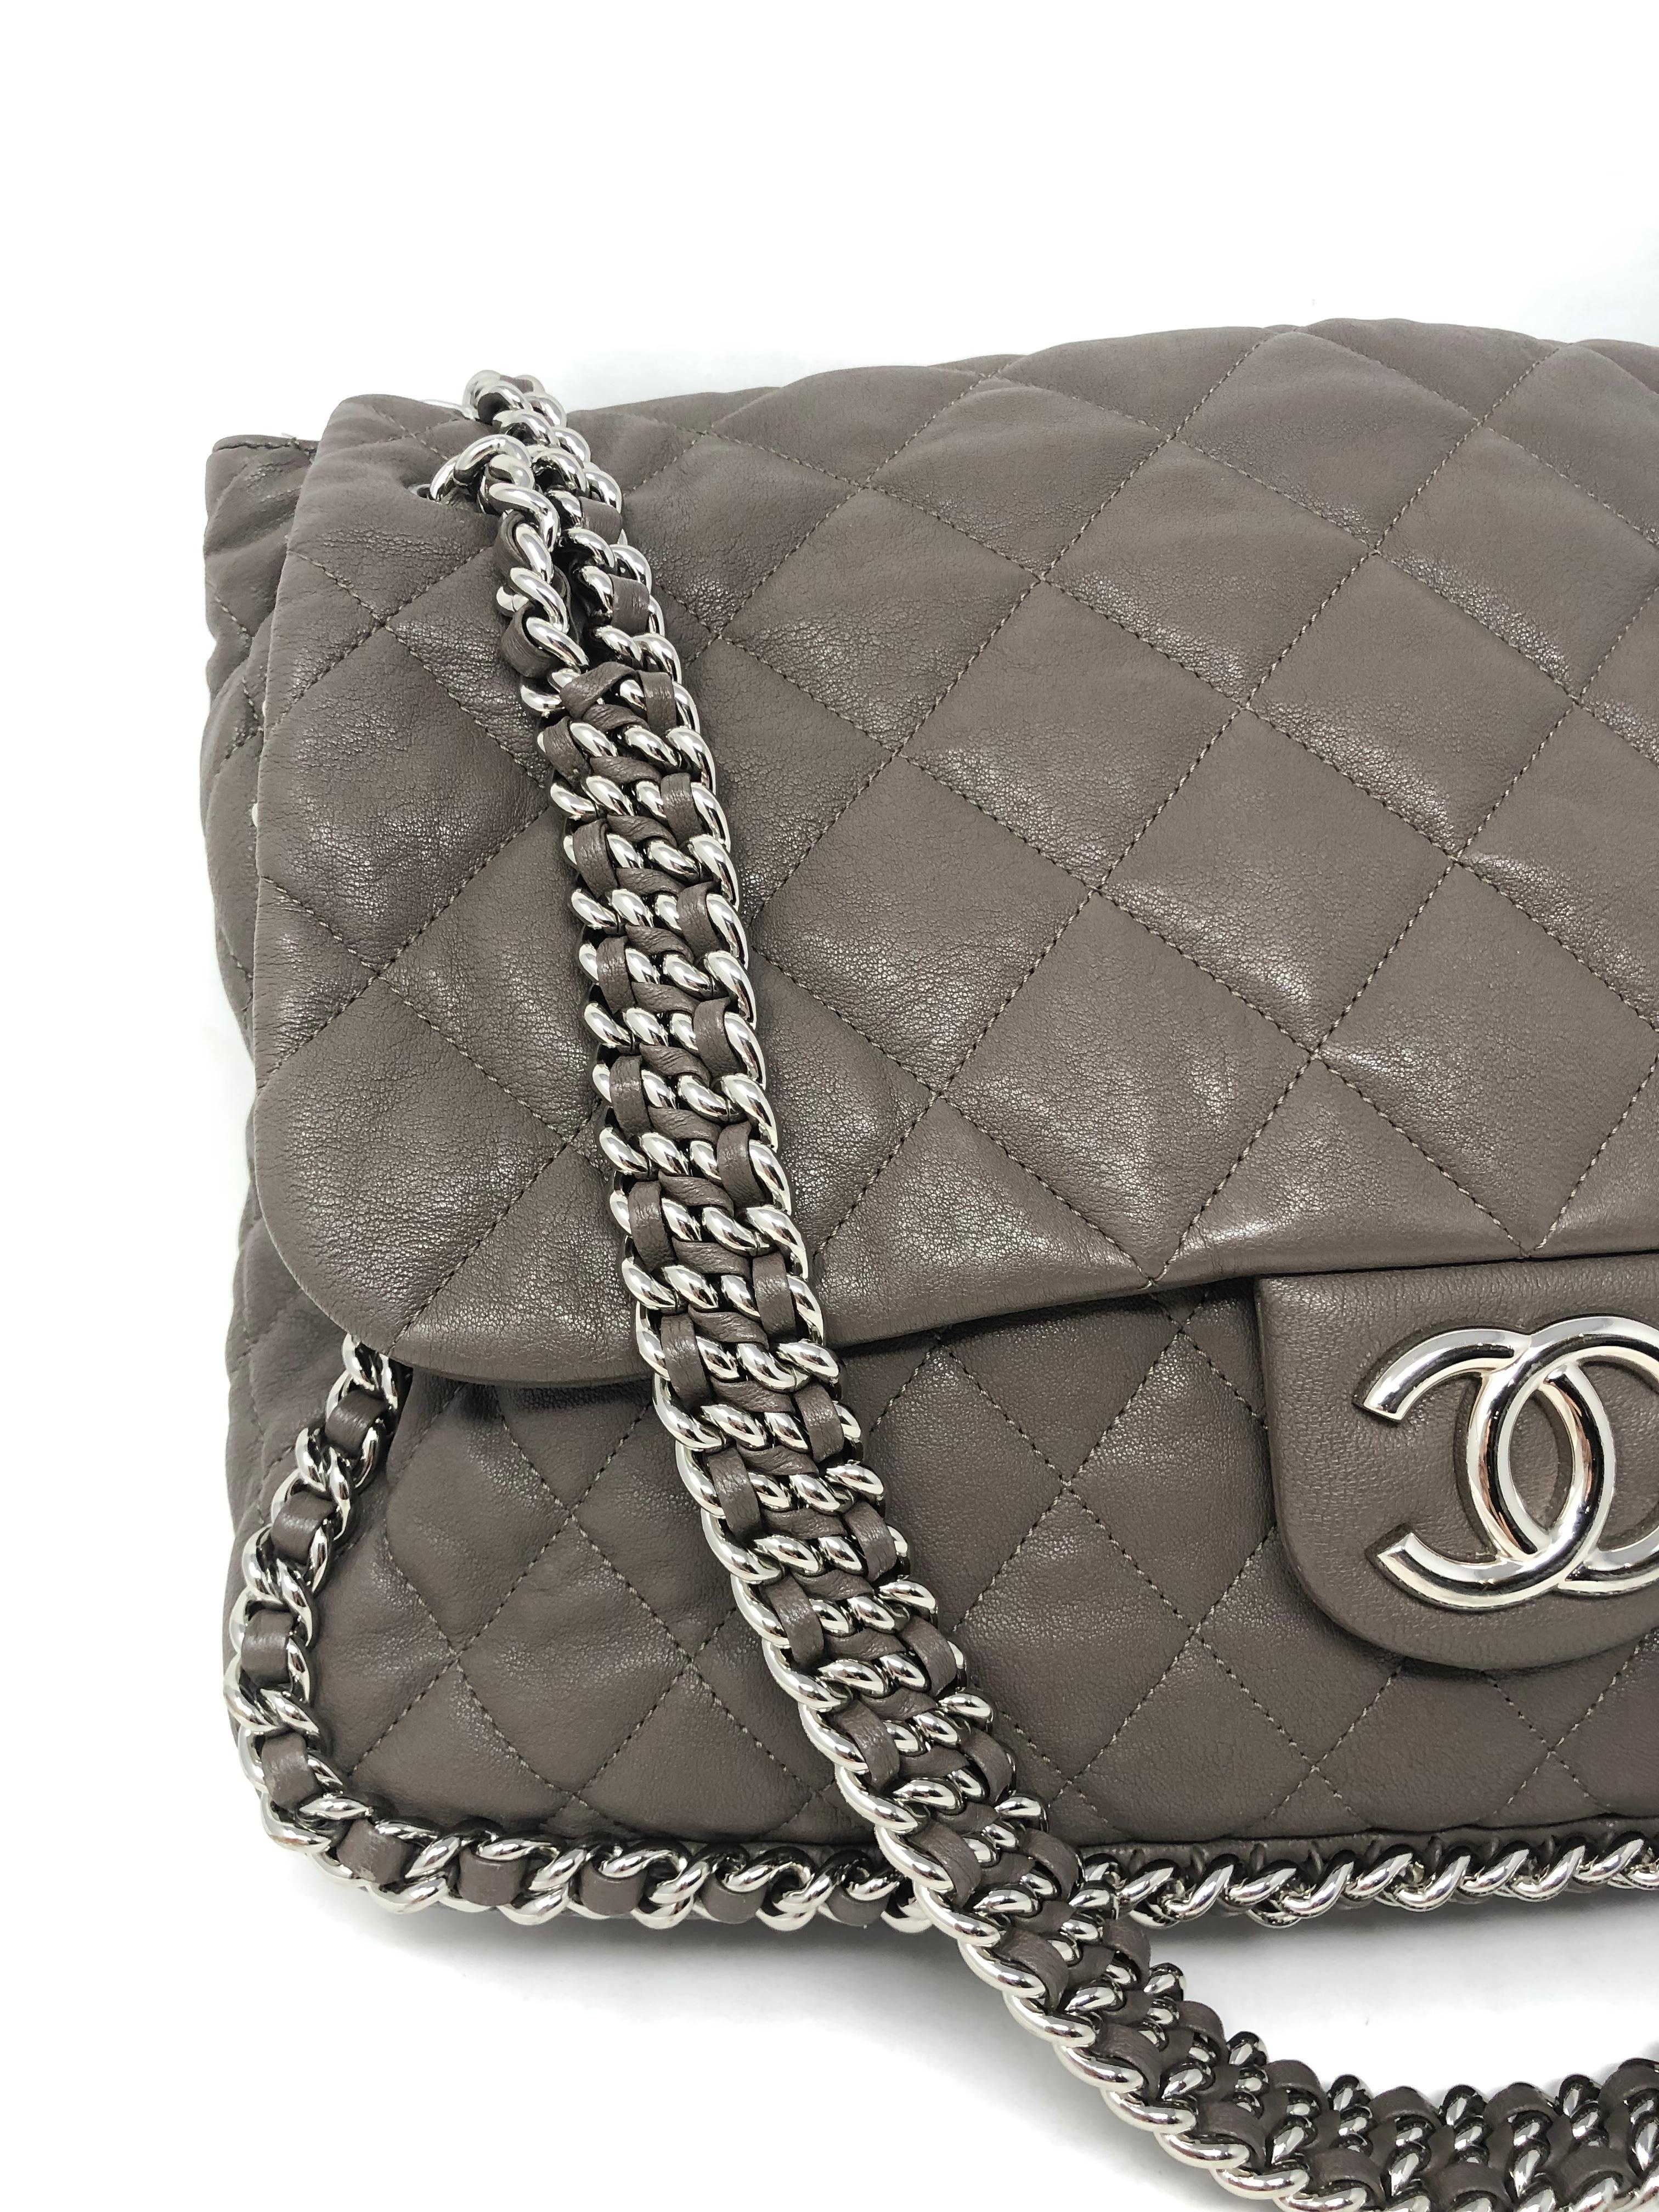 Chanel Large Gray Chain Around Bag. Silver hardware. Taupe gray color bag. Largest Chain around size with thick handle. Guaranteed authentic. 